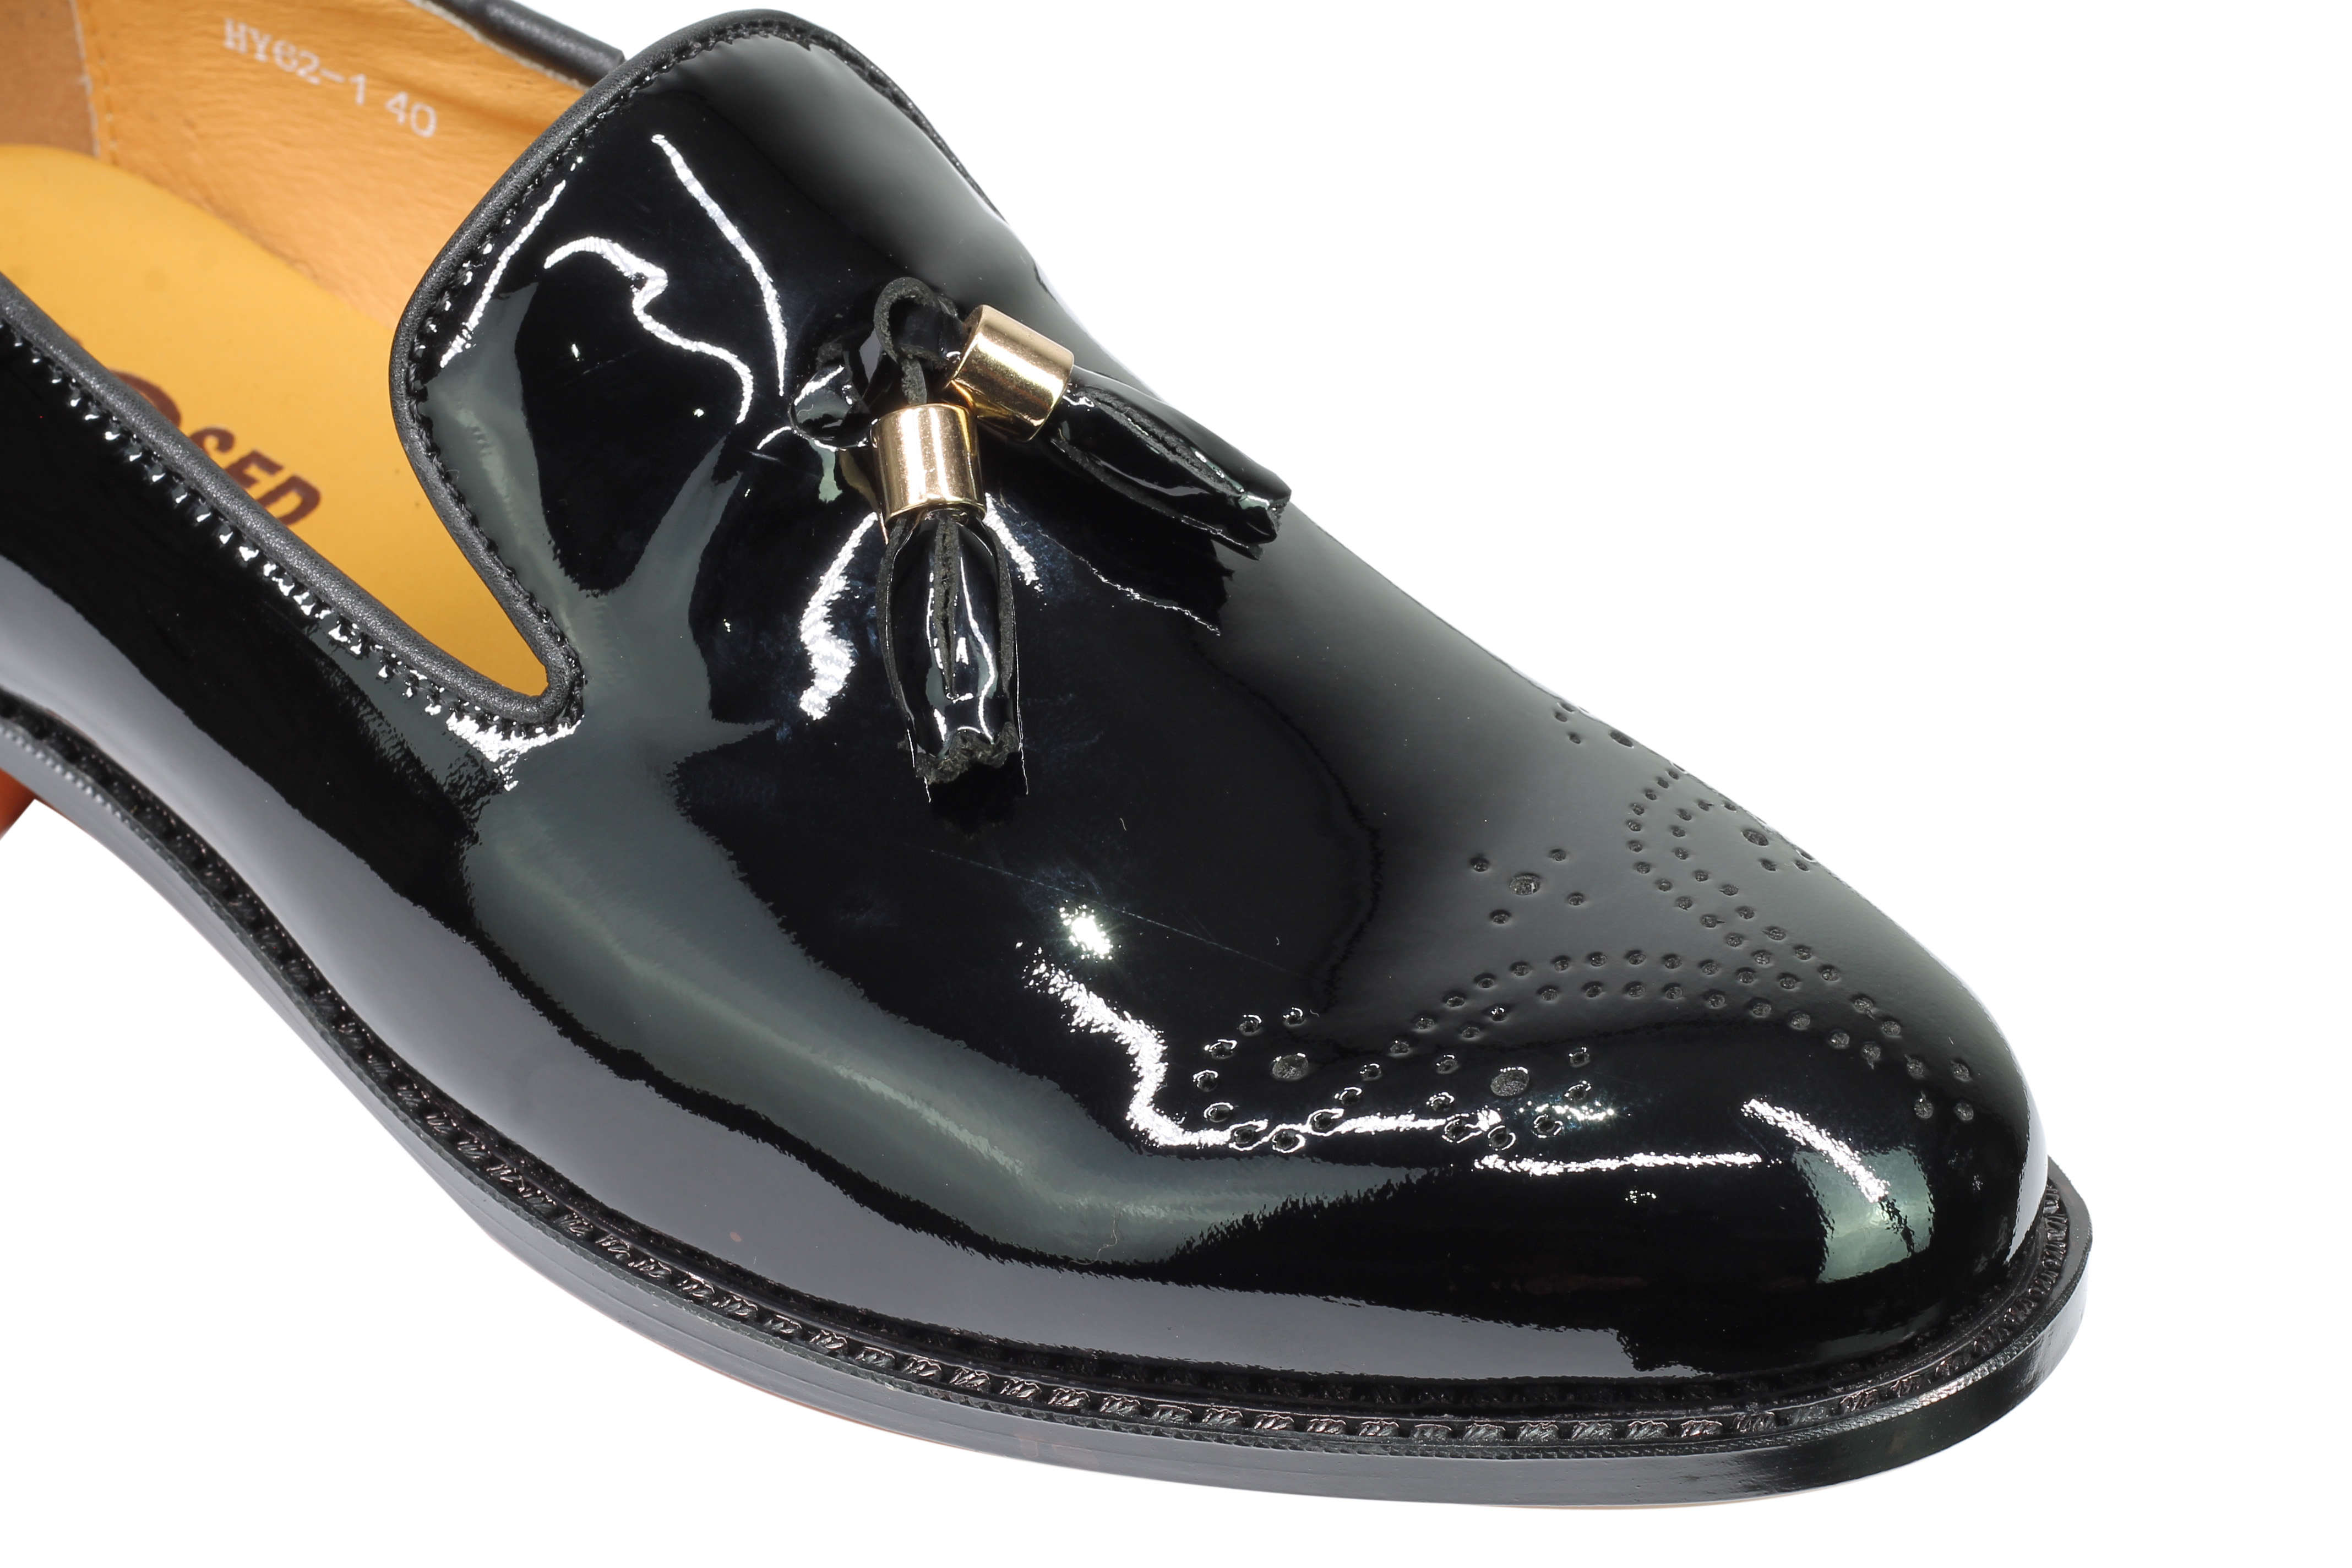 Real Leather Black Patent Tassel Loafers